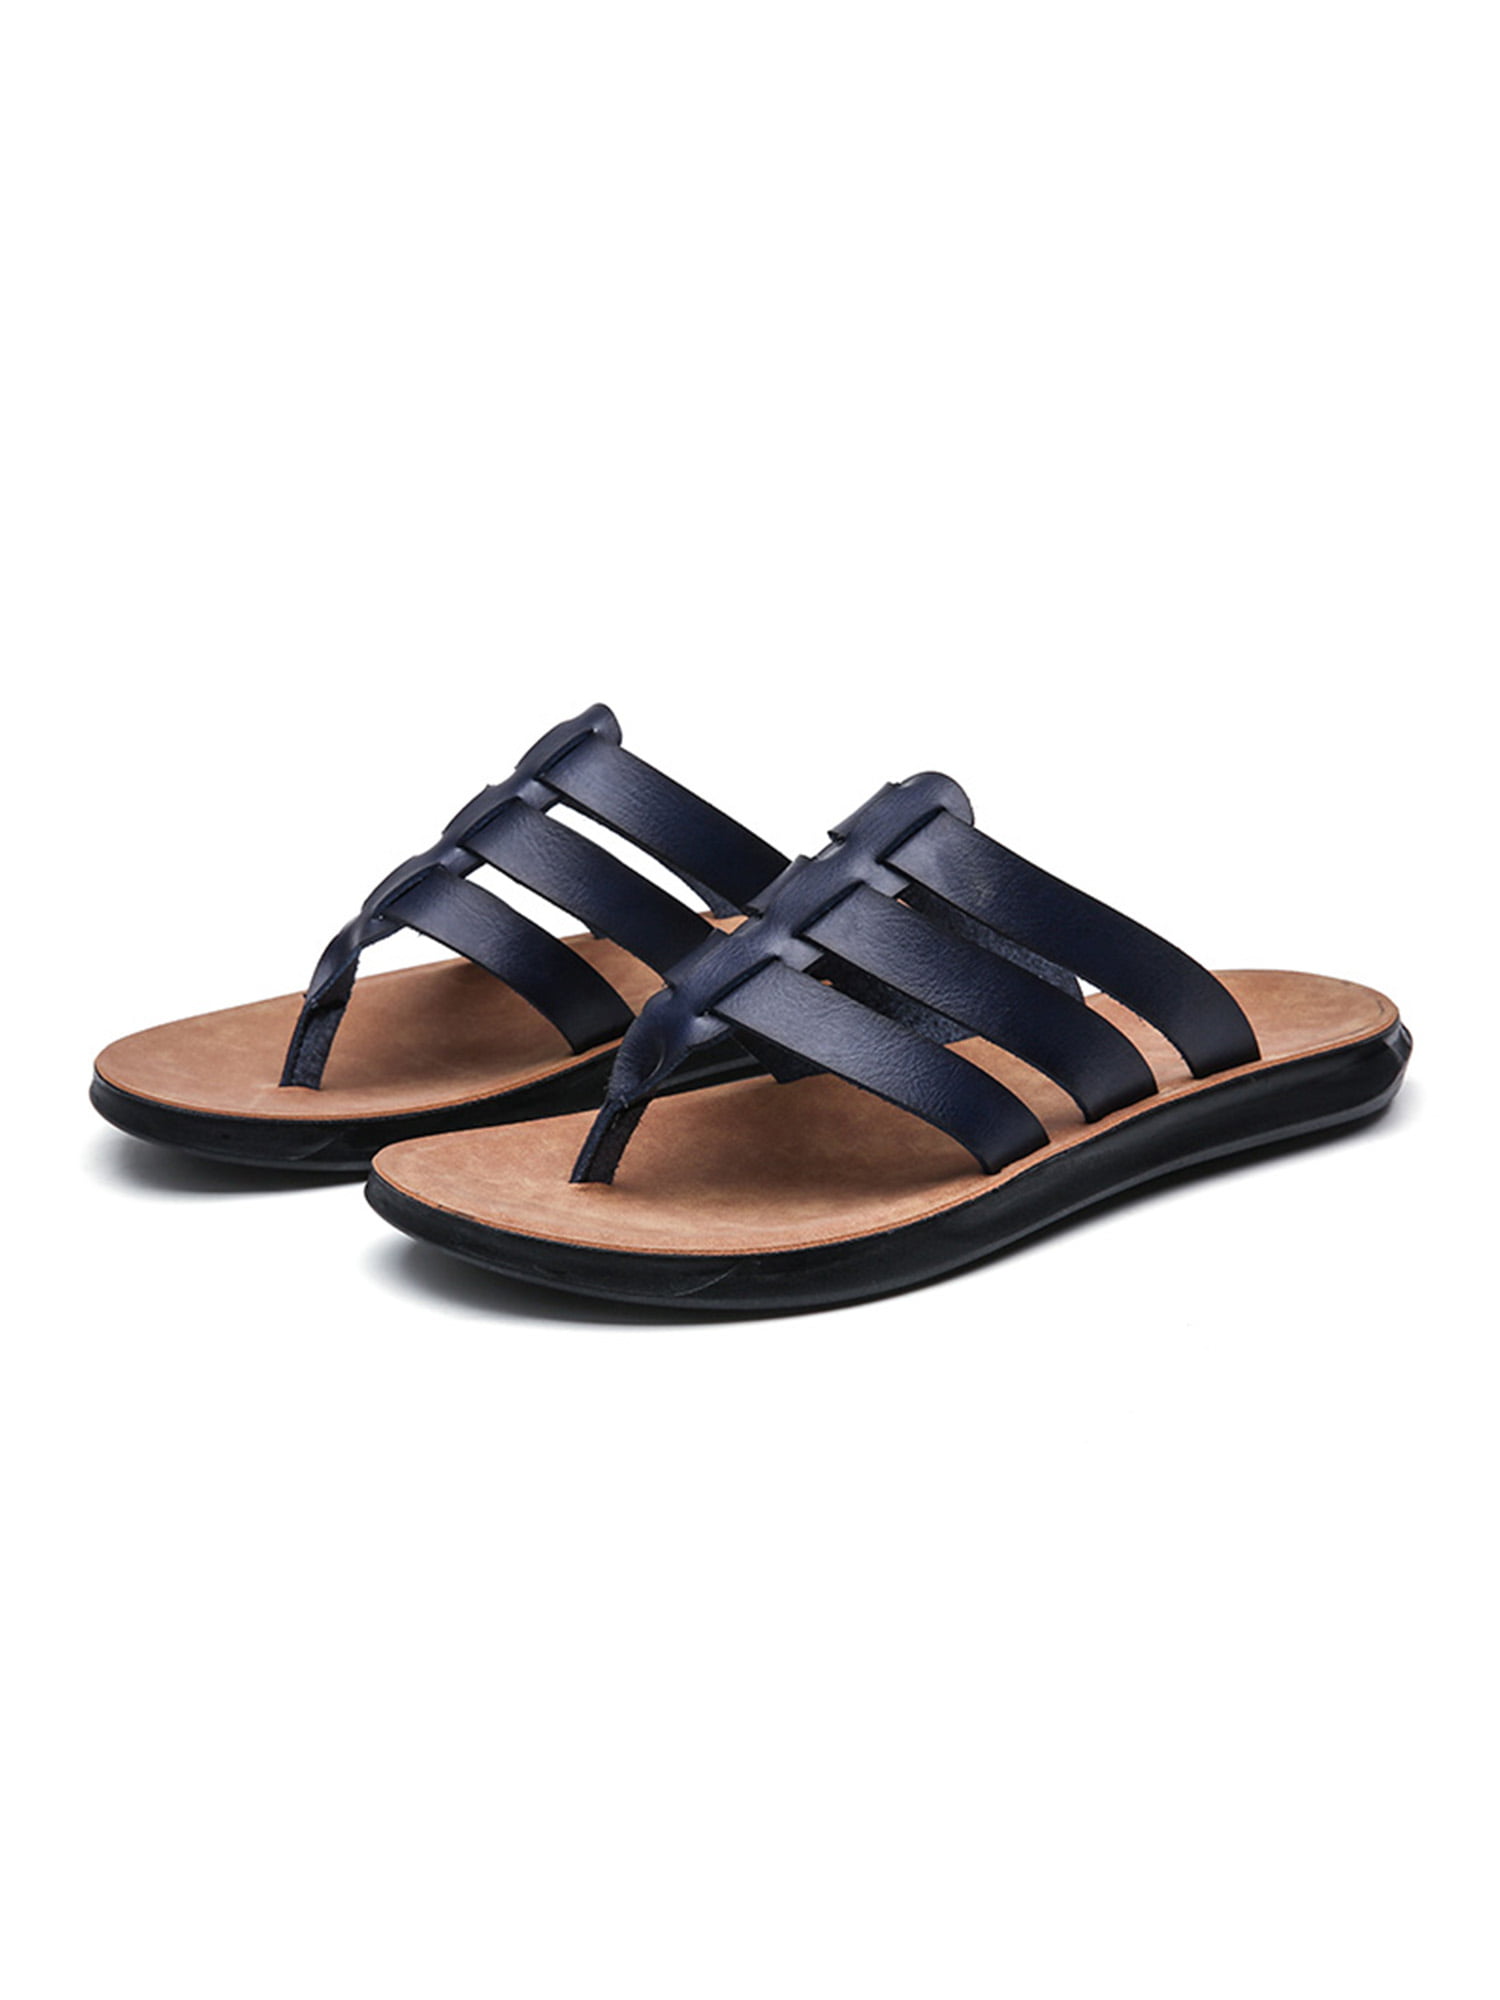 MENS LEISURE WALKING HOLIDAY FLIP FLOPS BEACH THONG PADDED SANDALS MULES HOLIDAY 